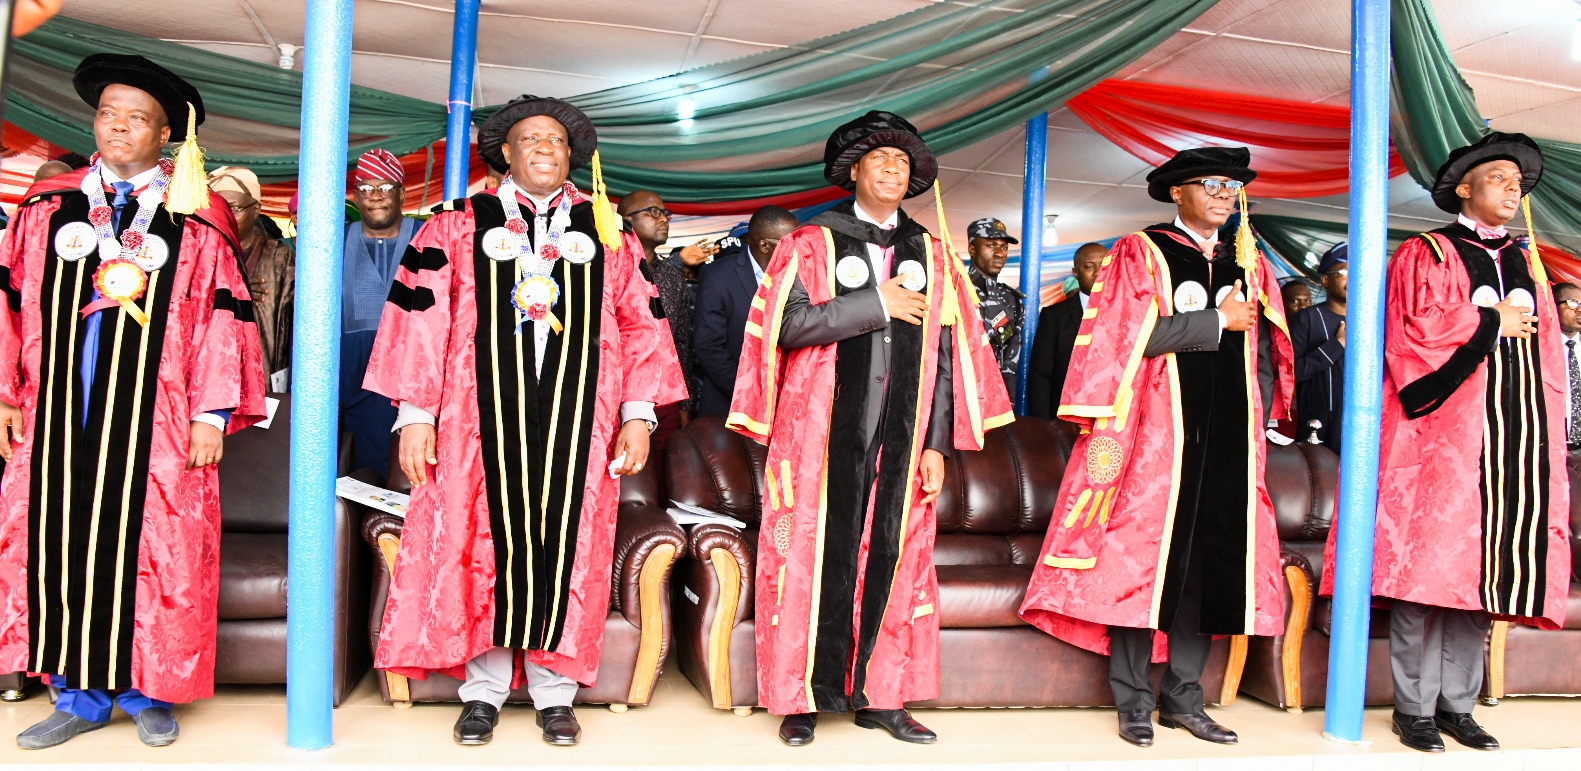 L-R: Registrar, Lagos State Polytechnic, Mr. Shakirudeen Bello; Rector, Mr. Samuel Sogunro; Lagos State Deputy Governor, Dr. Obafemi Hamzat; Governor Babajide Sanwo-Olu and Special Adviser to the Governor on Education, Mr. Tokunbo Wahab during the 27th Convocation and Award Ceremony of Lagos State Polytechnic at the Convocation Ground, Ikorodu Campus, Lagos, on Thursday, March 12, 2020.